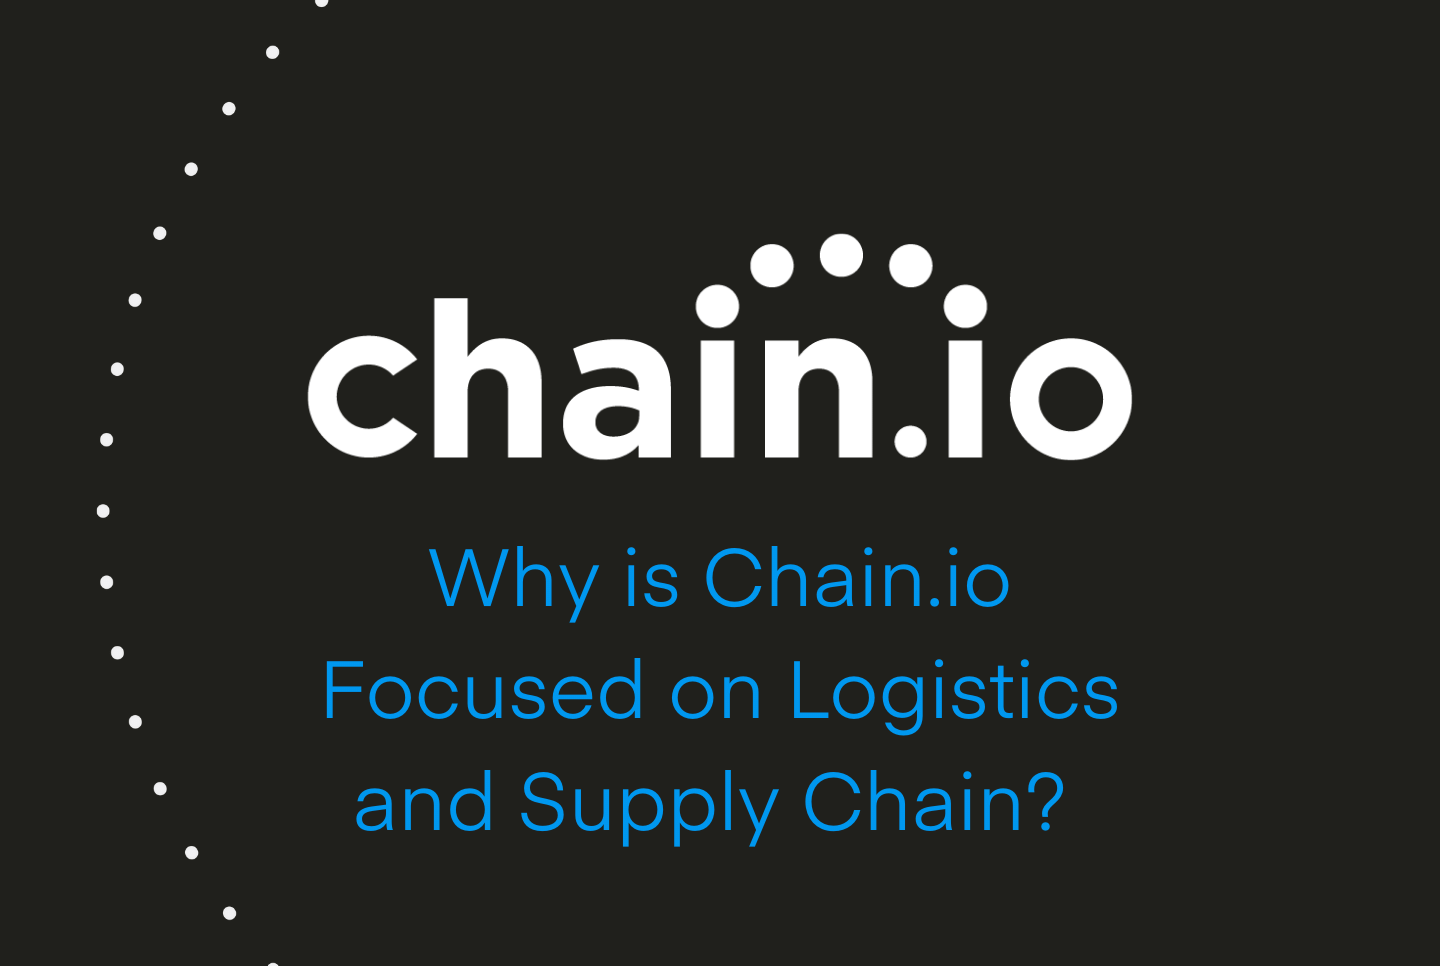 Learn how Chain.io's deep domain expertise in logistics and supply chain helps you focus on solving real business problems instead of creating technical "solutions" that don't really fix anything.